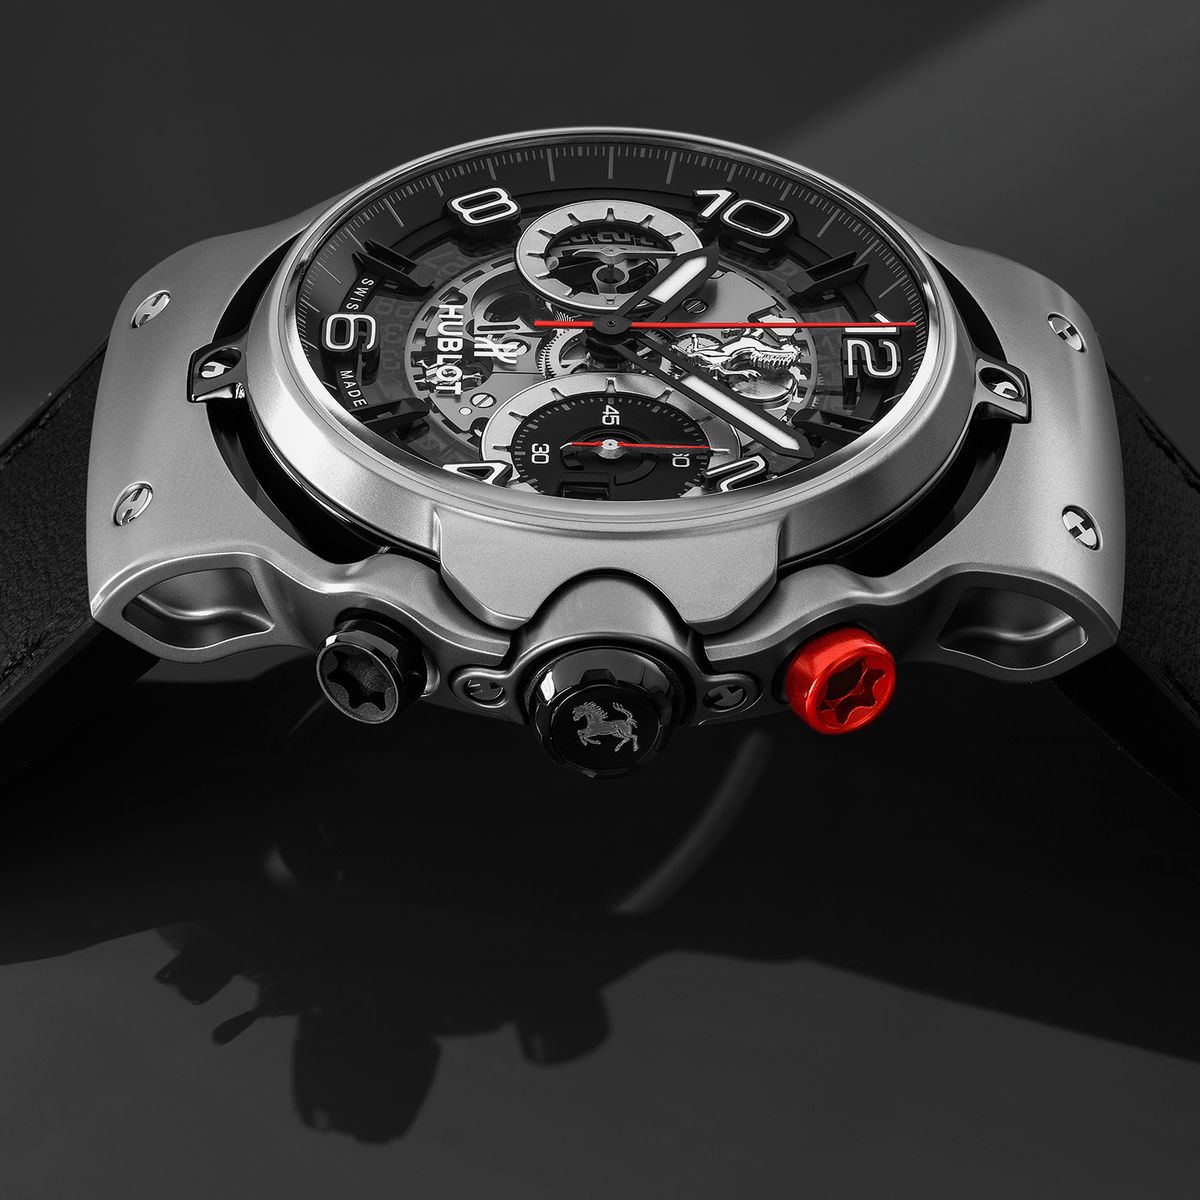 Horse power: the story behind Hublot and Ferrari's breakout hit